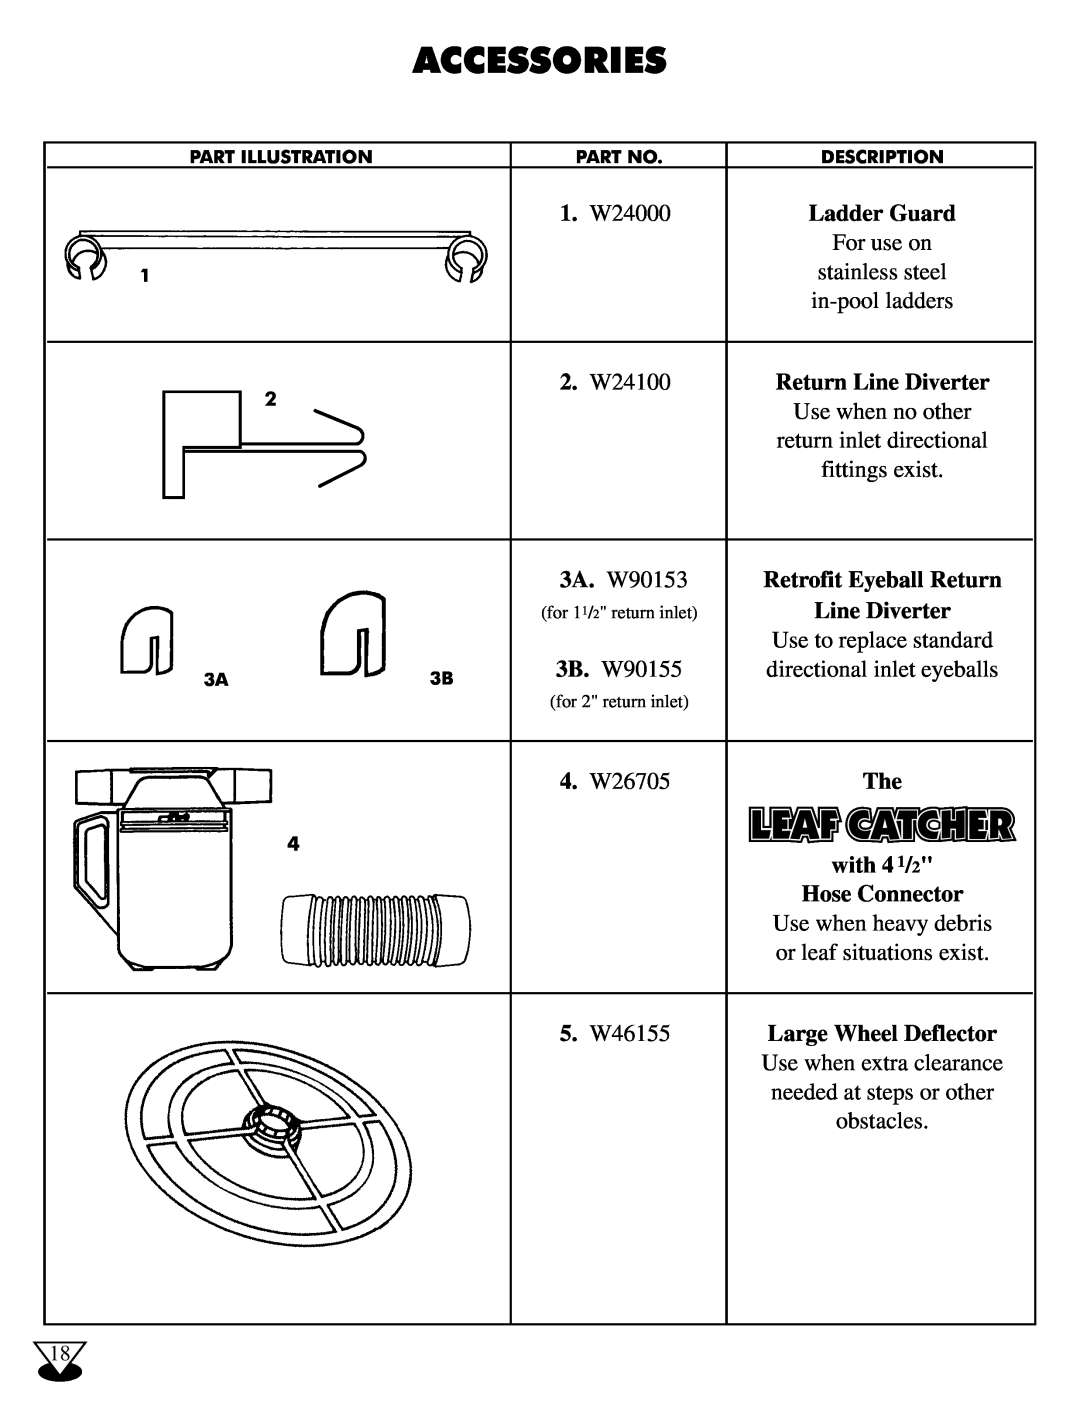 Baracoda G3 owner manual Accessories, Ladder Guard, Hose Connector 